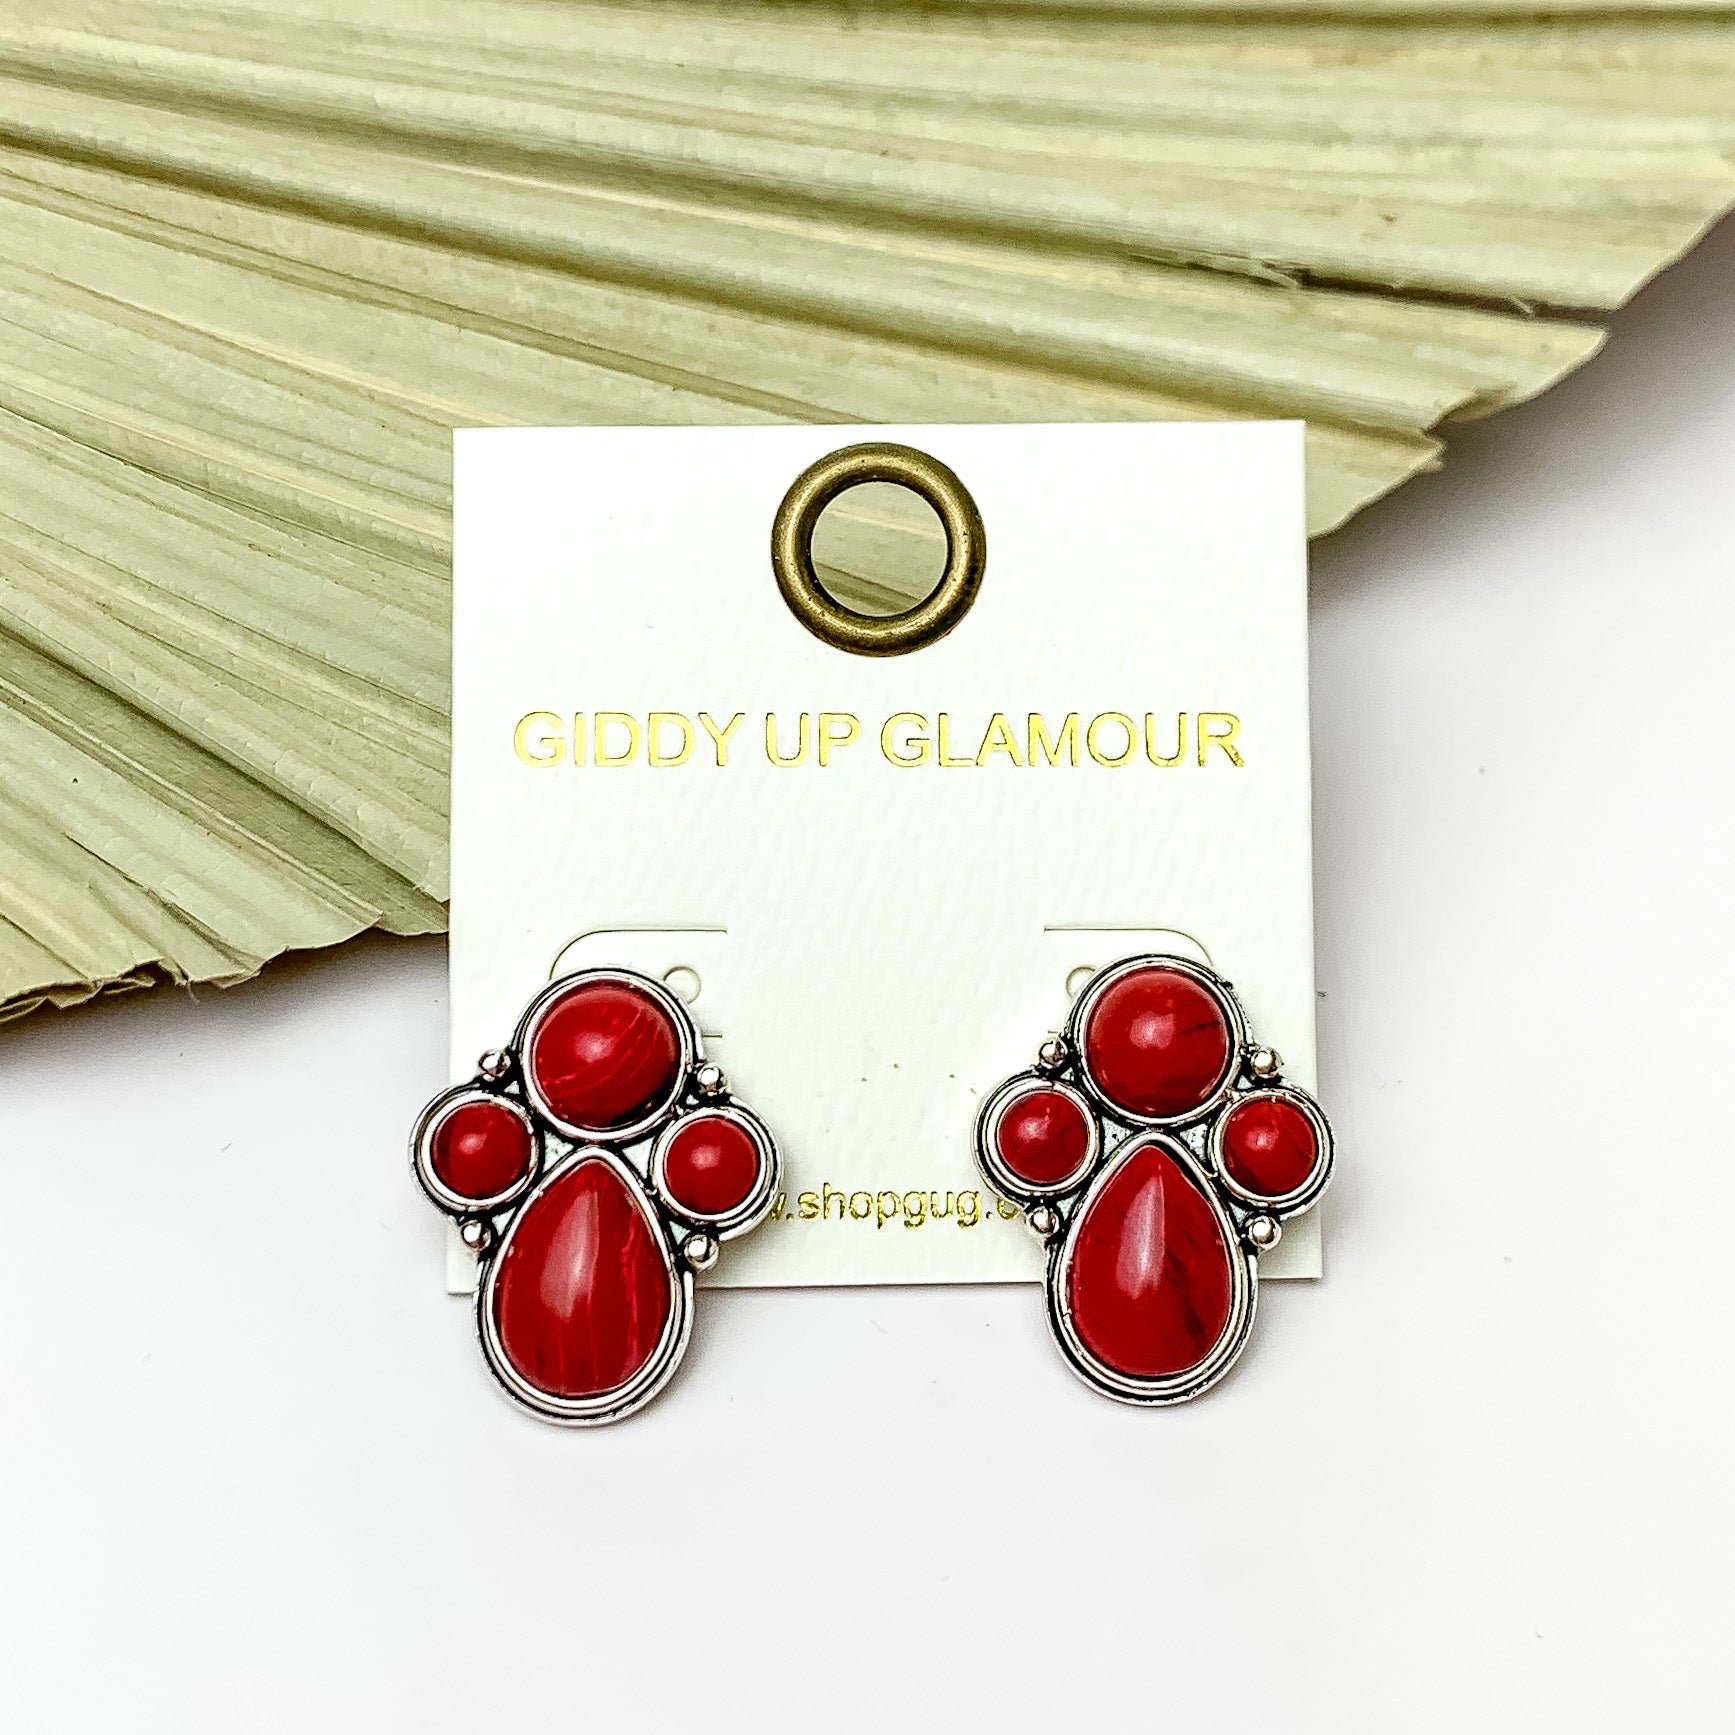 Silver Tone Cluster Stone Earrings in Red. Pictured on a white background with a leaf fan behind the earrings.